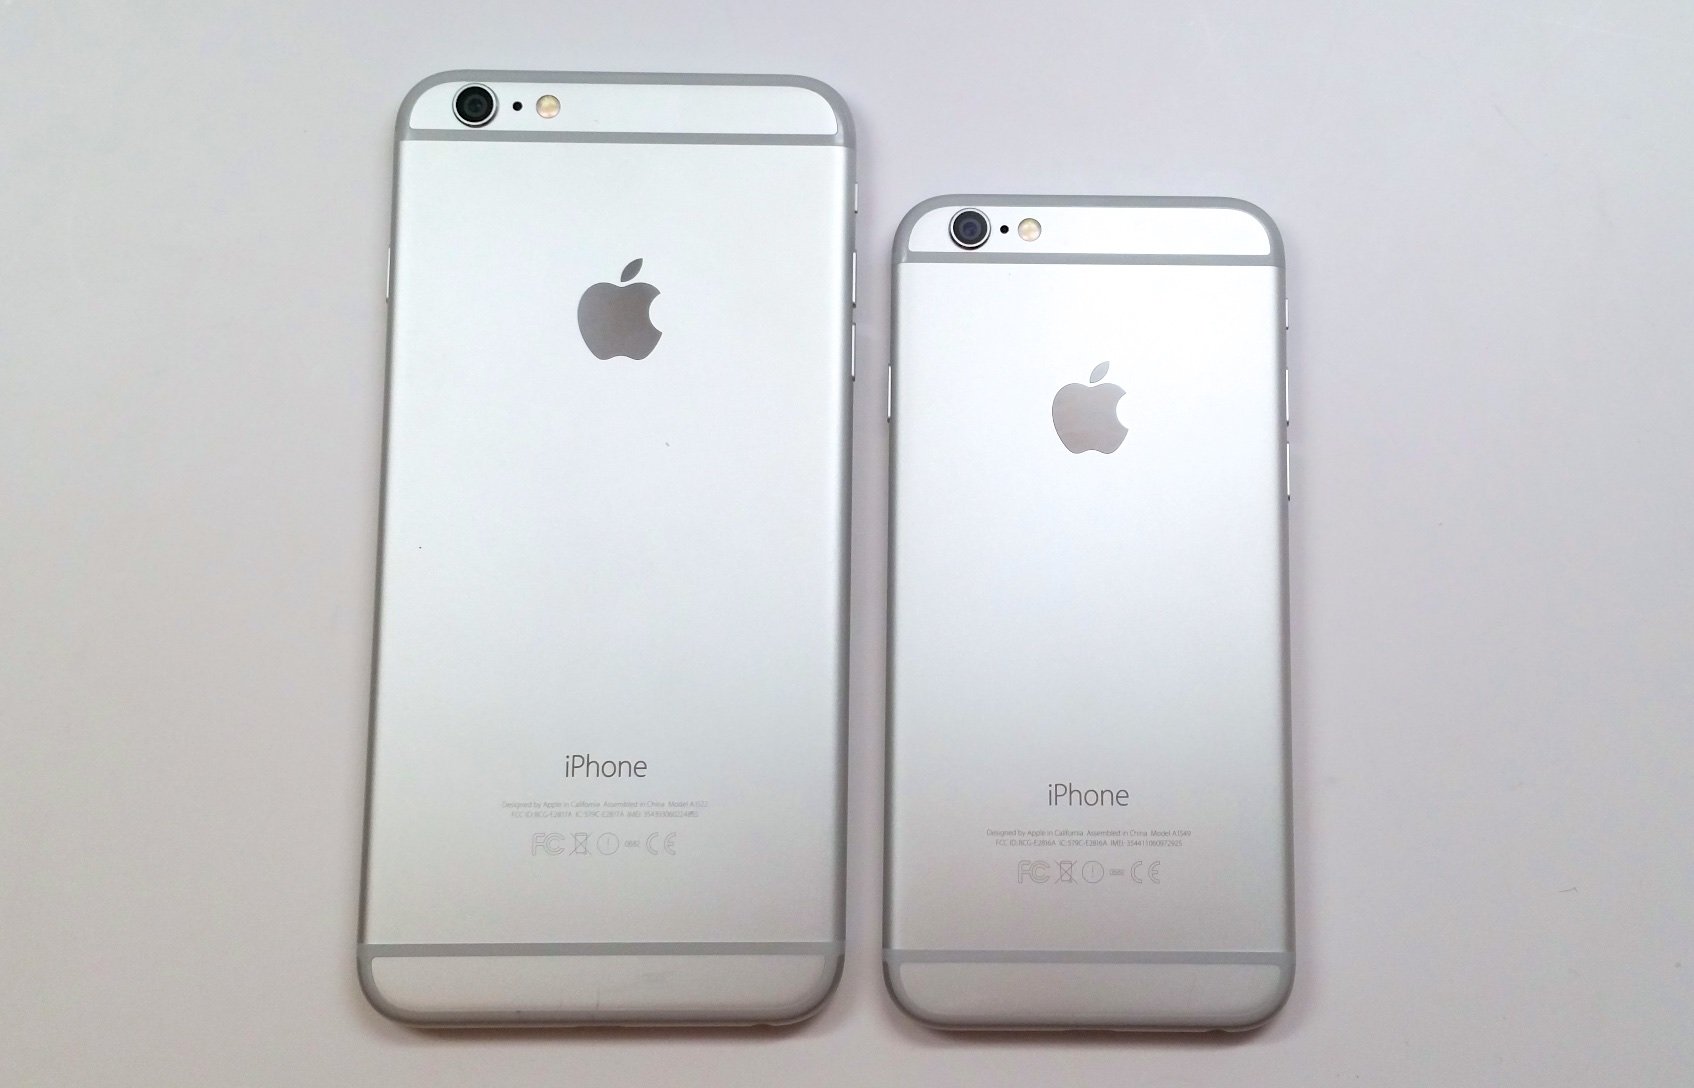 The iPhone 6 vs iPhone 6 Plus photo above shows the difference in size.